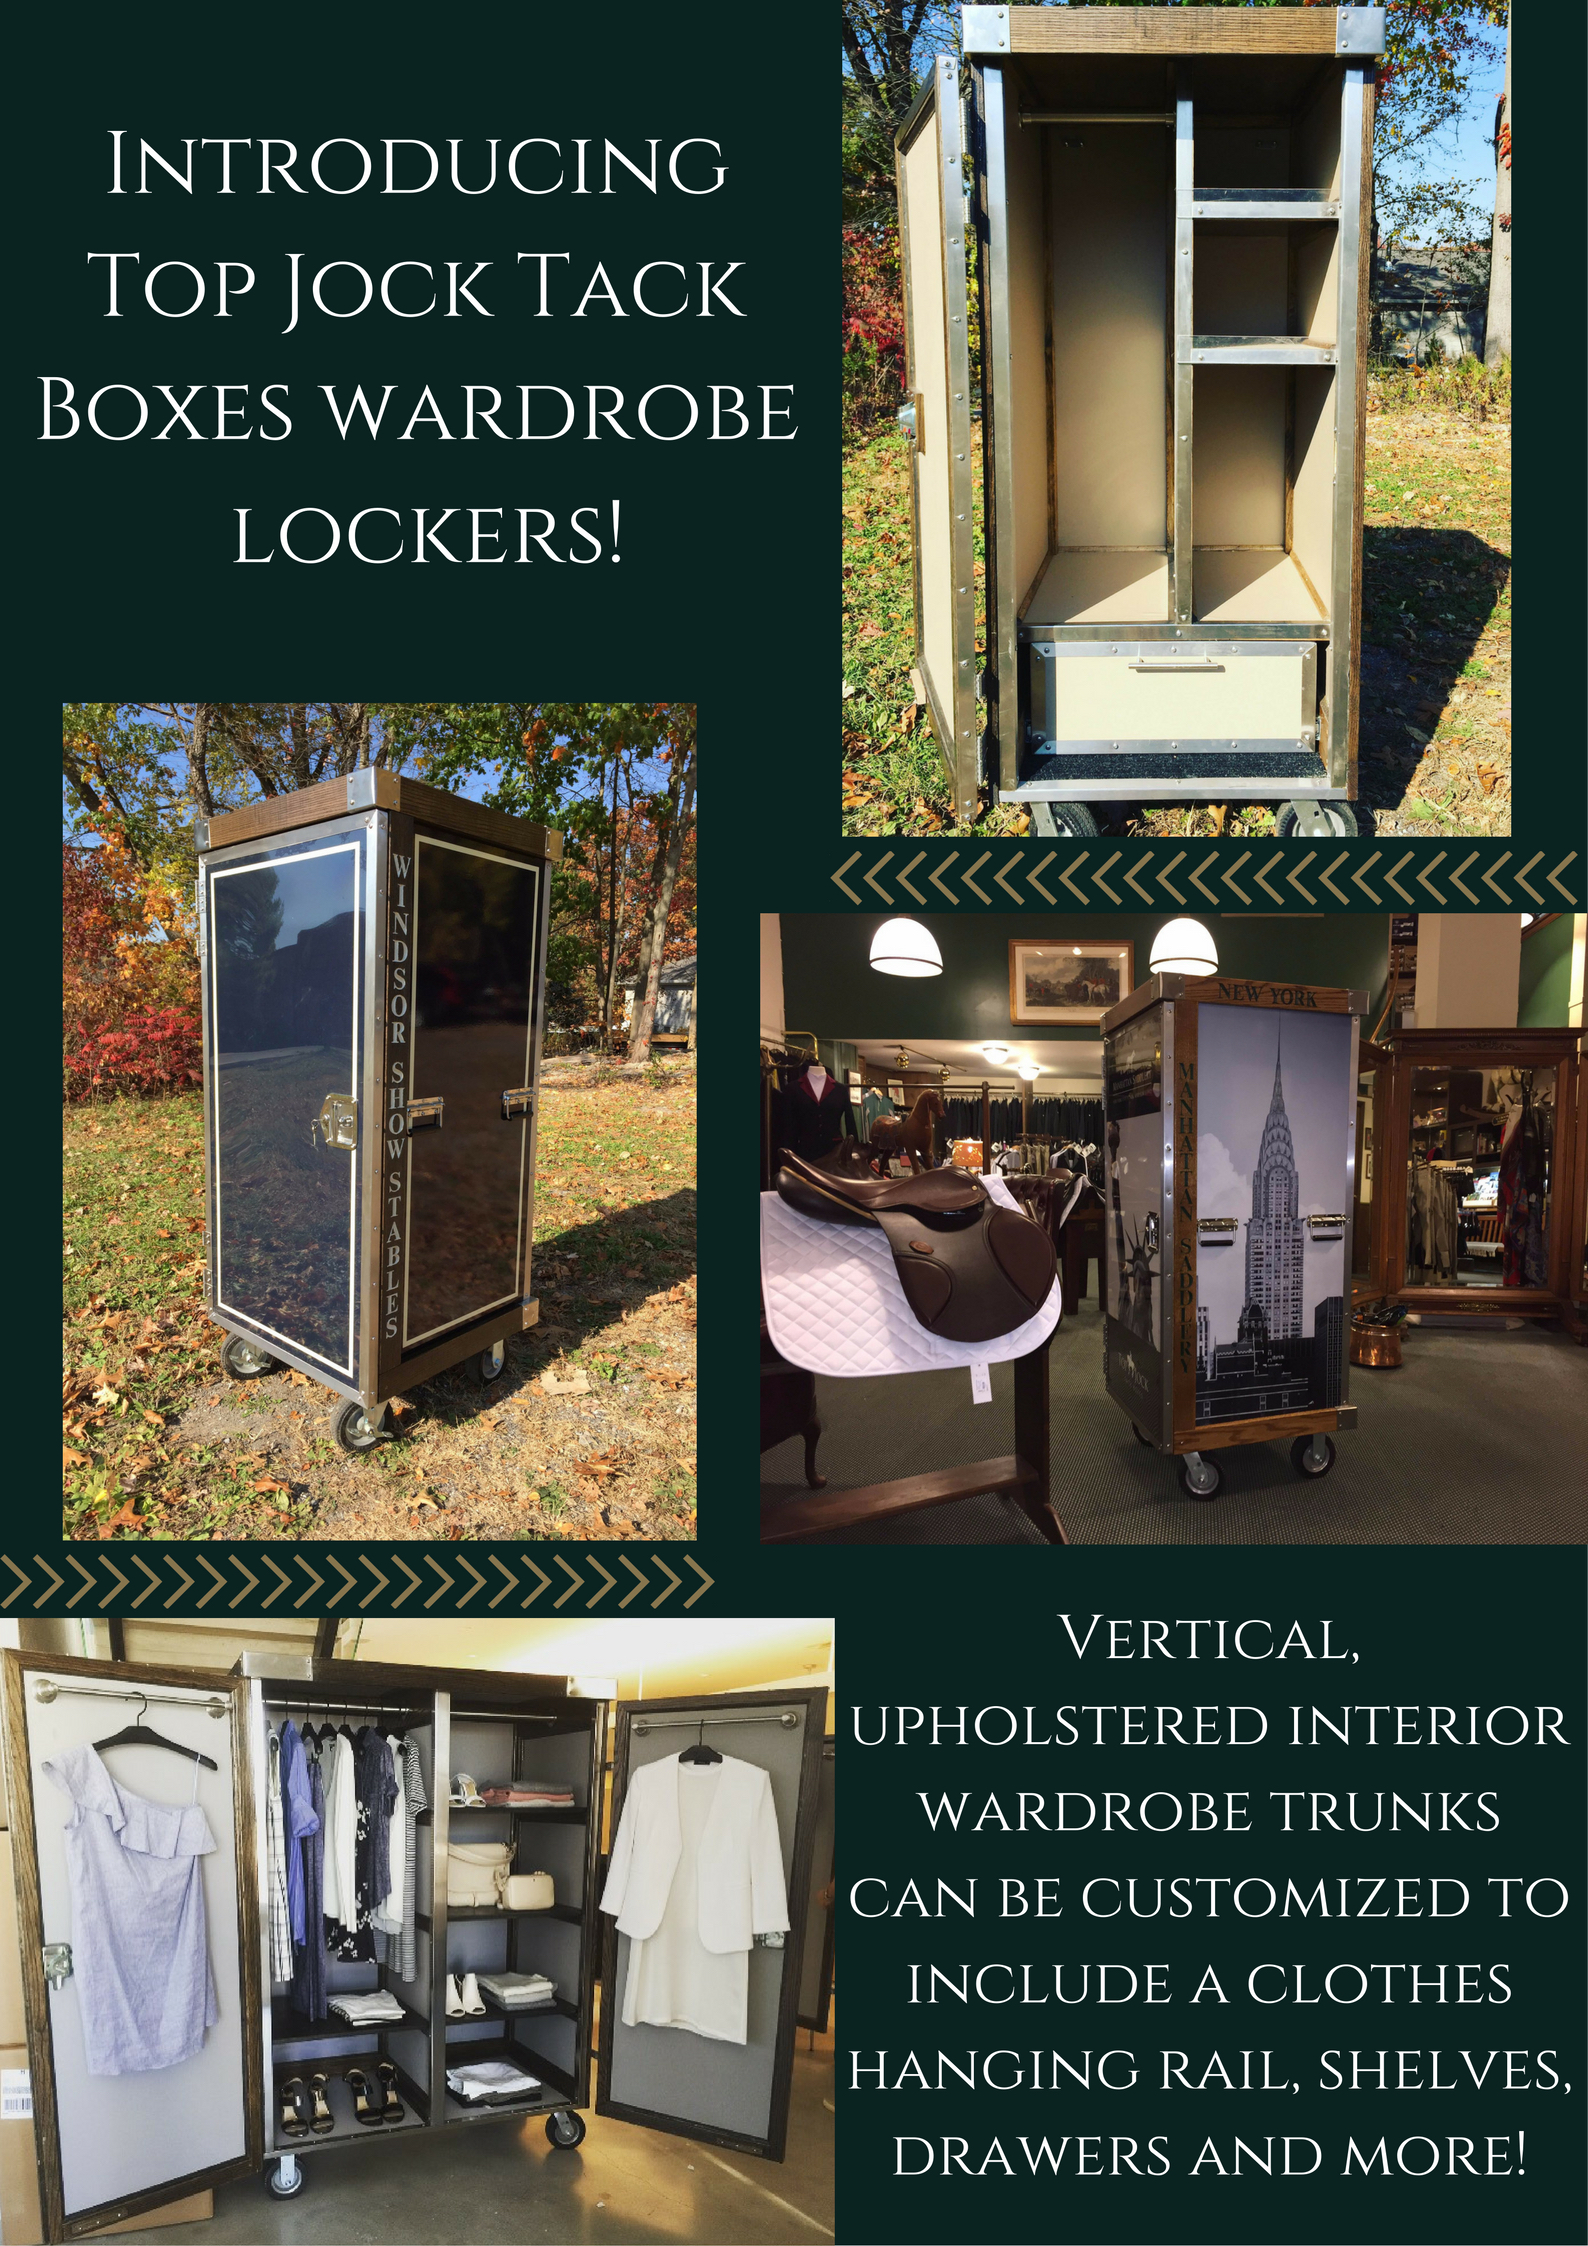 Bring Your Helmets, Boots, Jackets and More to the Show in Style with Top Jock Tack Boxes!